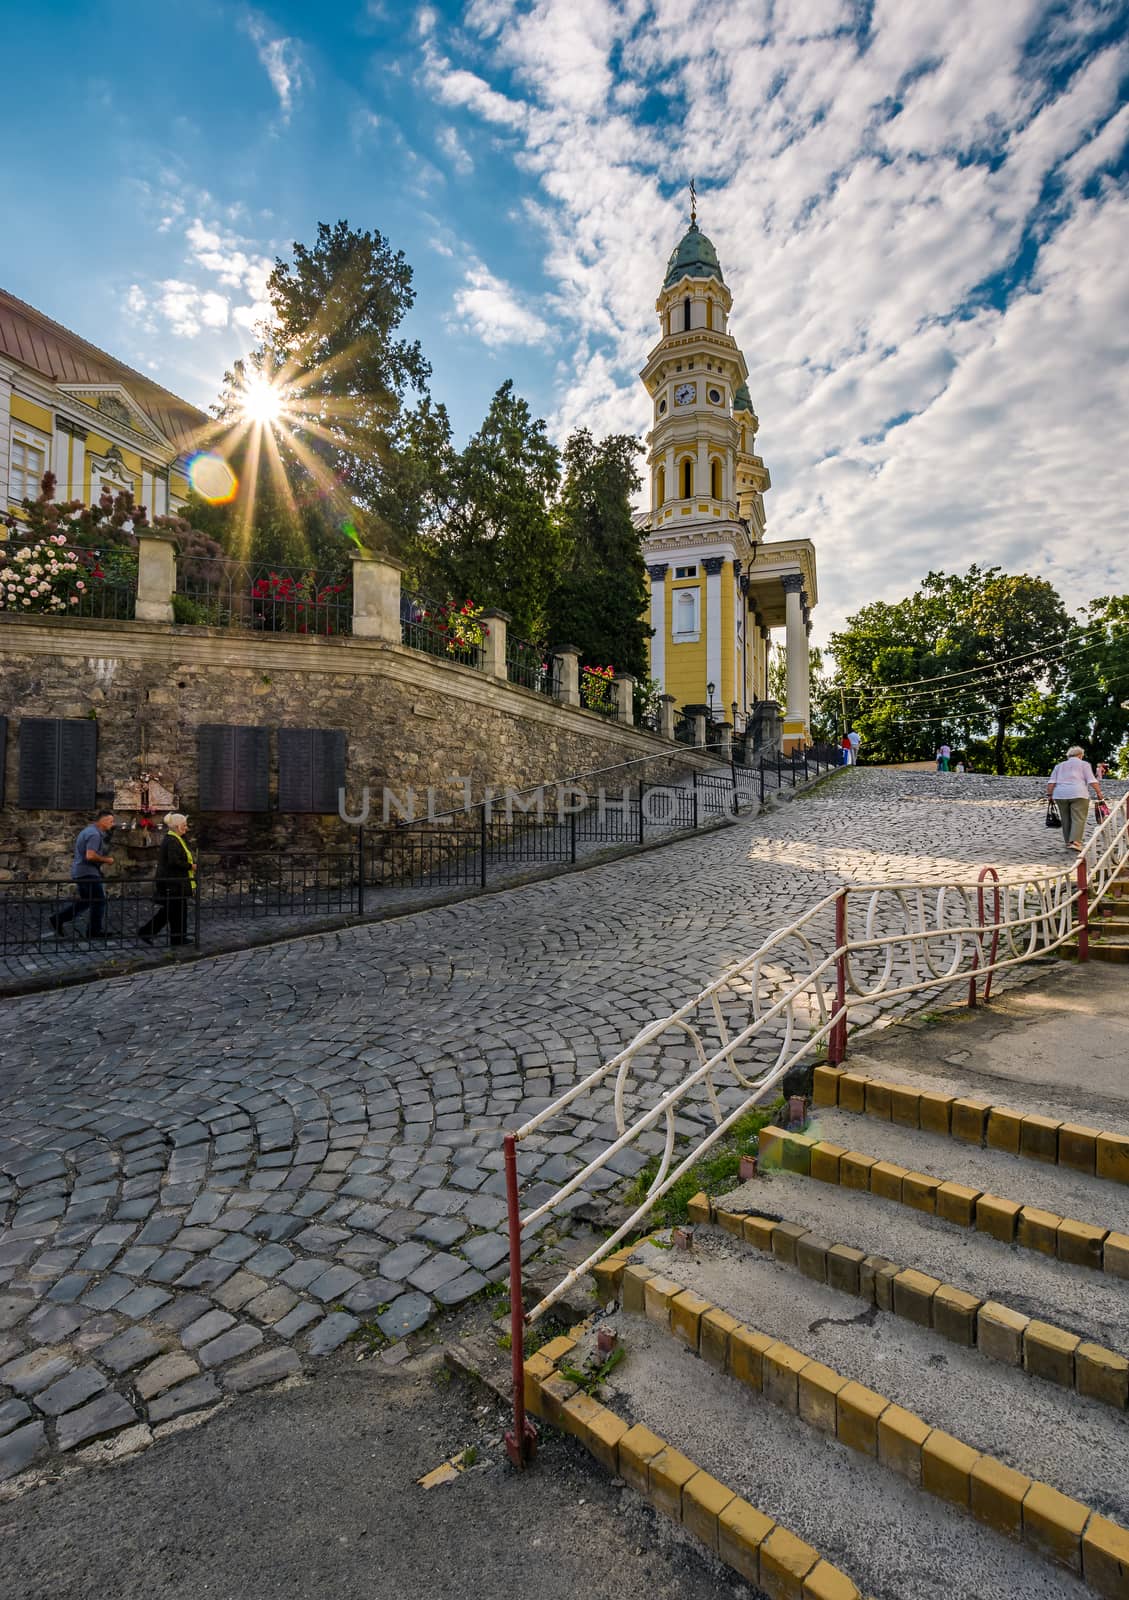  people go uphill to the Greco Catholic cathedral  by Pellinni